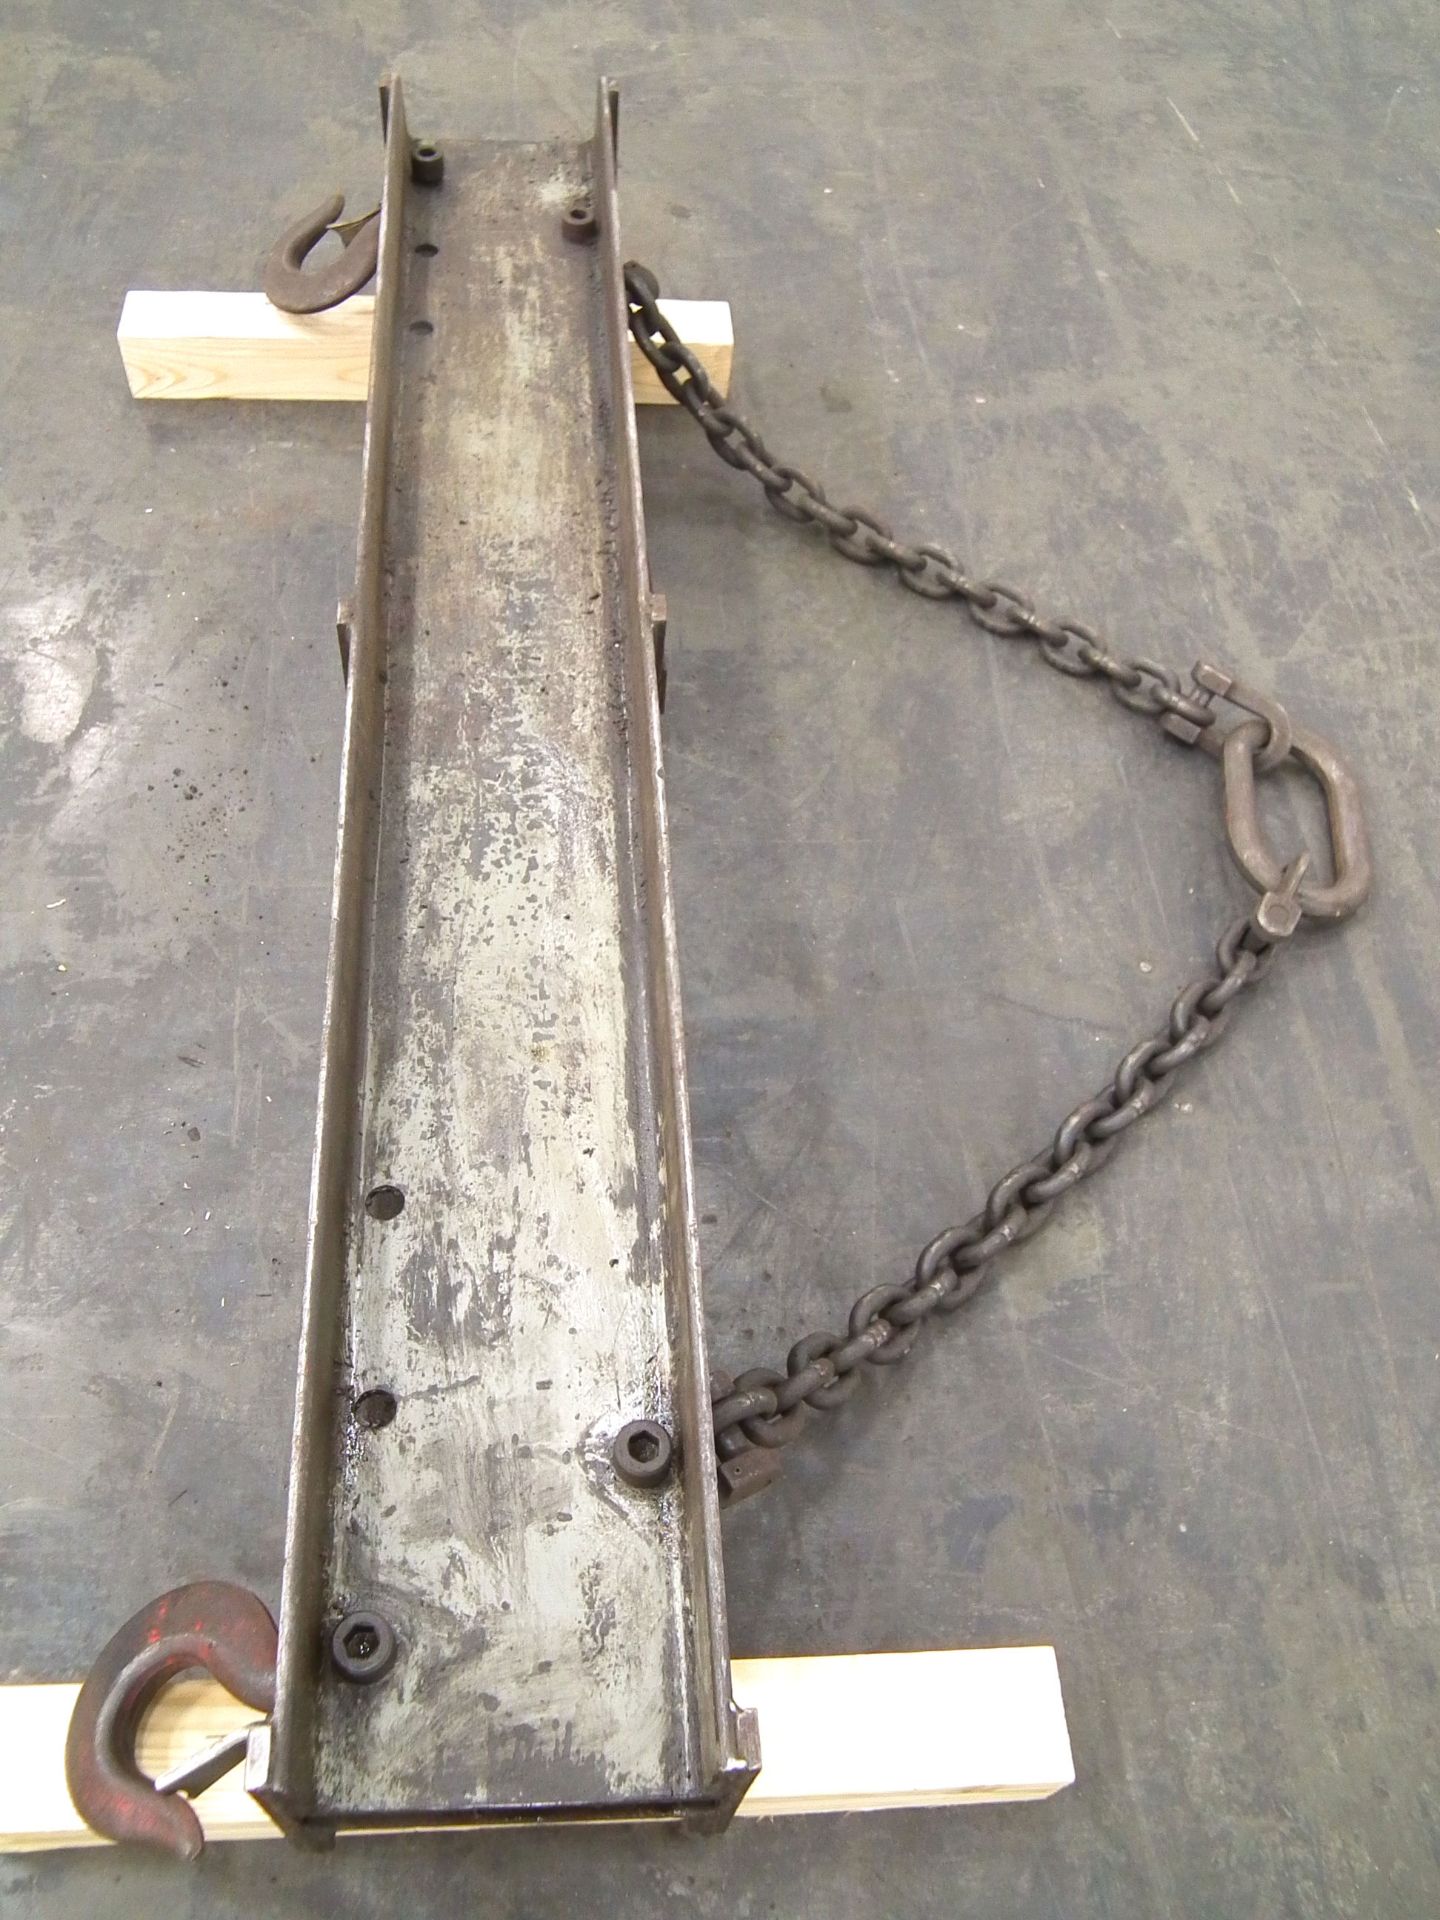 72 Inch Long Spreader Bar with Hooks A4755 - Image 6 of 6